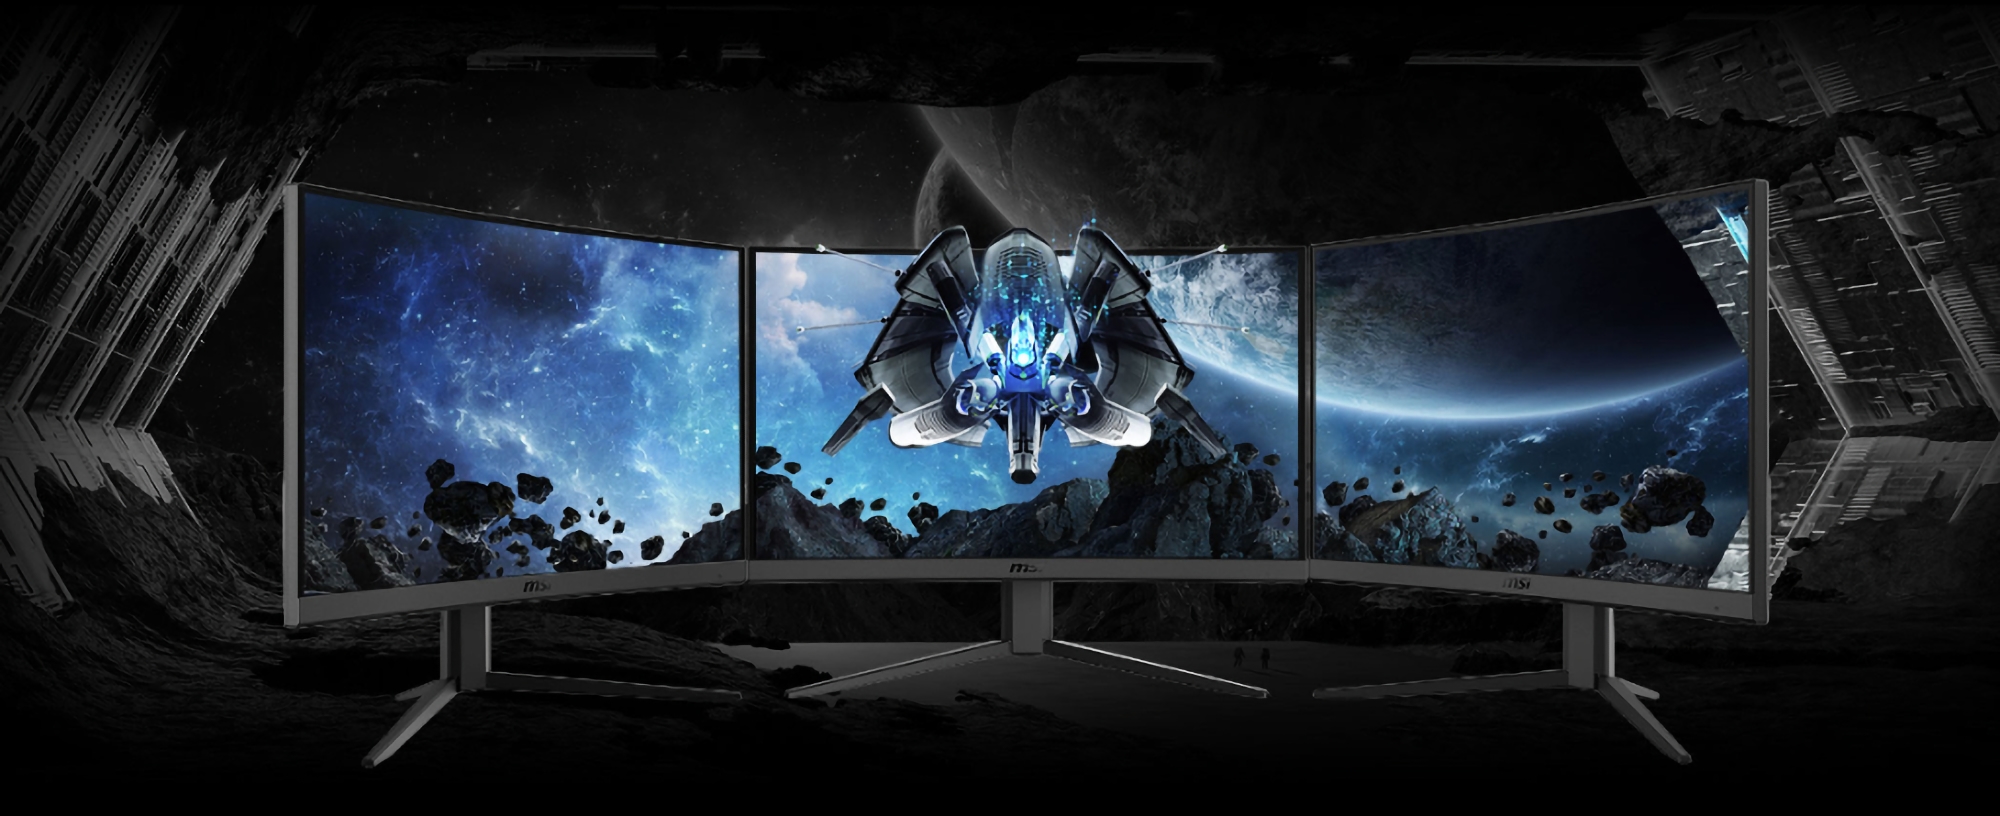 MSI G24C4 E2: Gaming monitor with 23.6″ curved display and 170Hz support